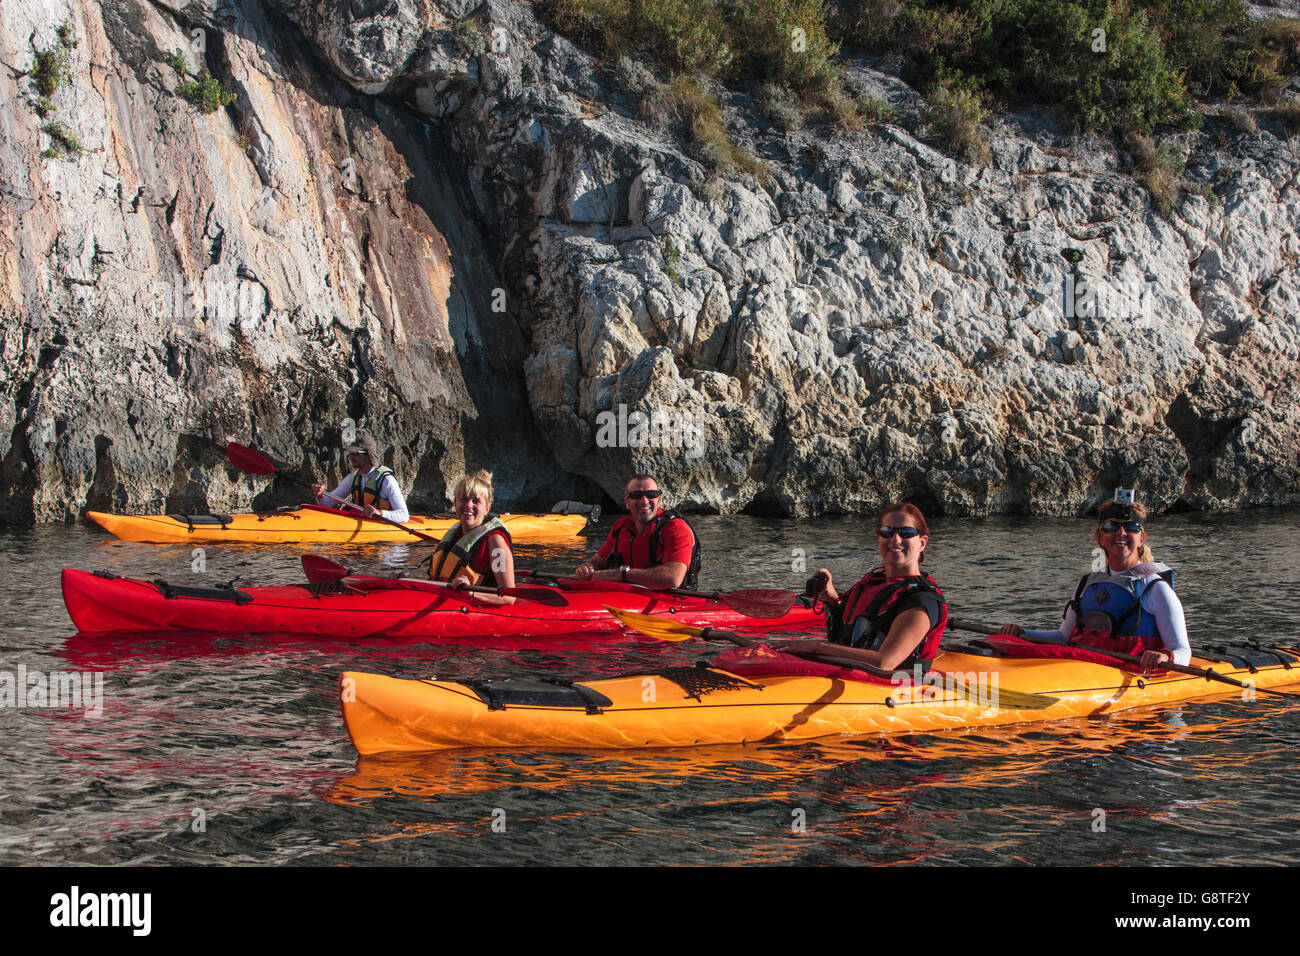 Group of people kayaking next to rock formation Stock Photo